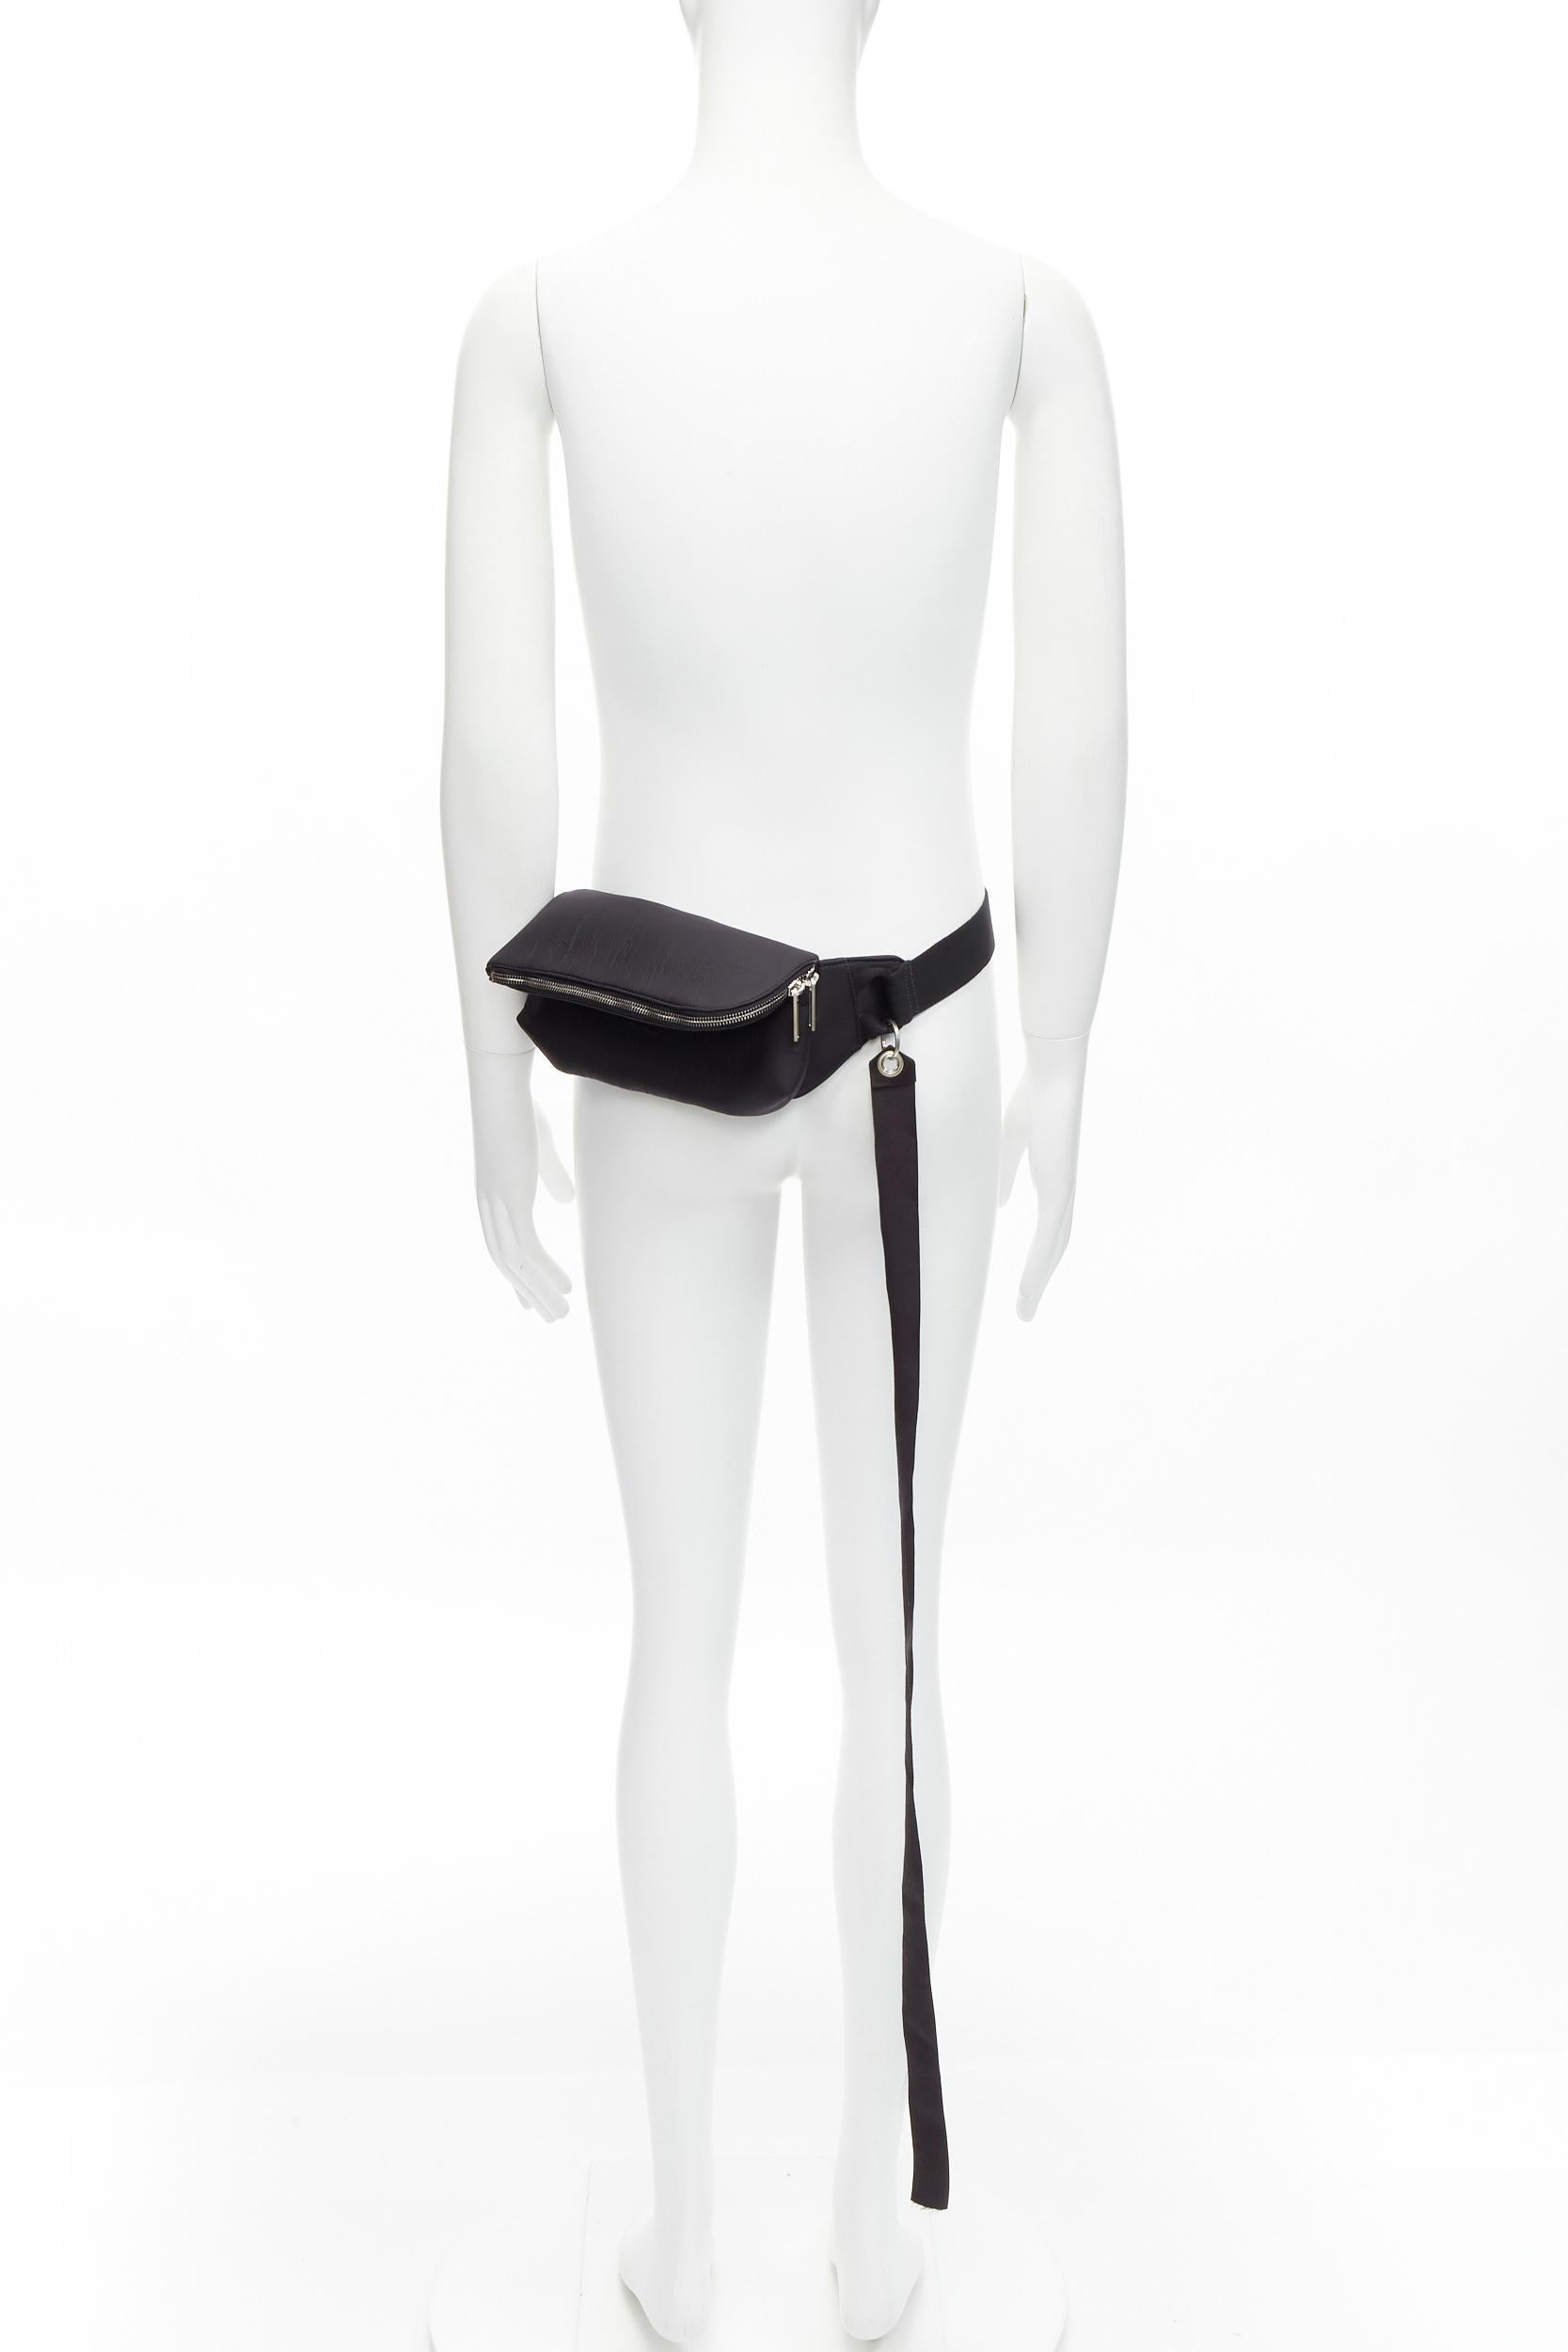 RICK OWENS black blistered neoprene silver zippers crossbody belt bag
Reference: TGAS/D00199
Brand: Rick Owens
Designer: Rick Owens
Material: Neoprene, Plastic, Fabric
Color: Black, Silver
Pattern: Solid
Closure: Zip
Lining: Black Fabric
Extra